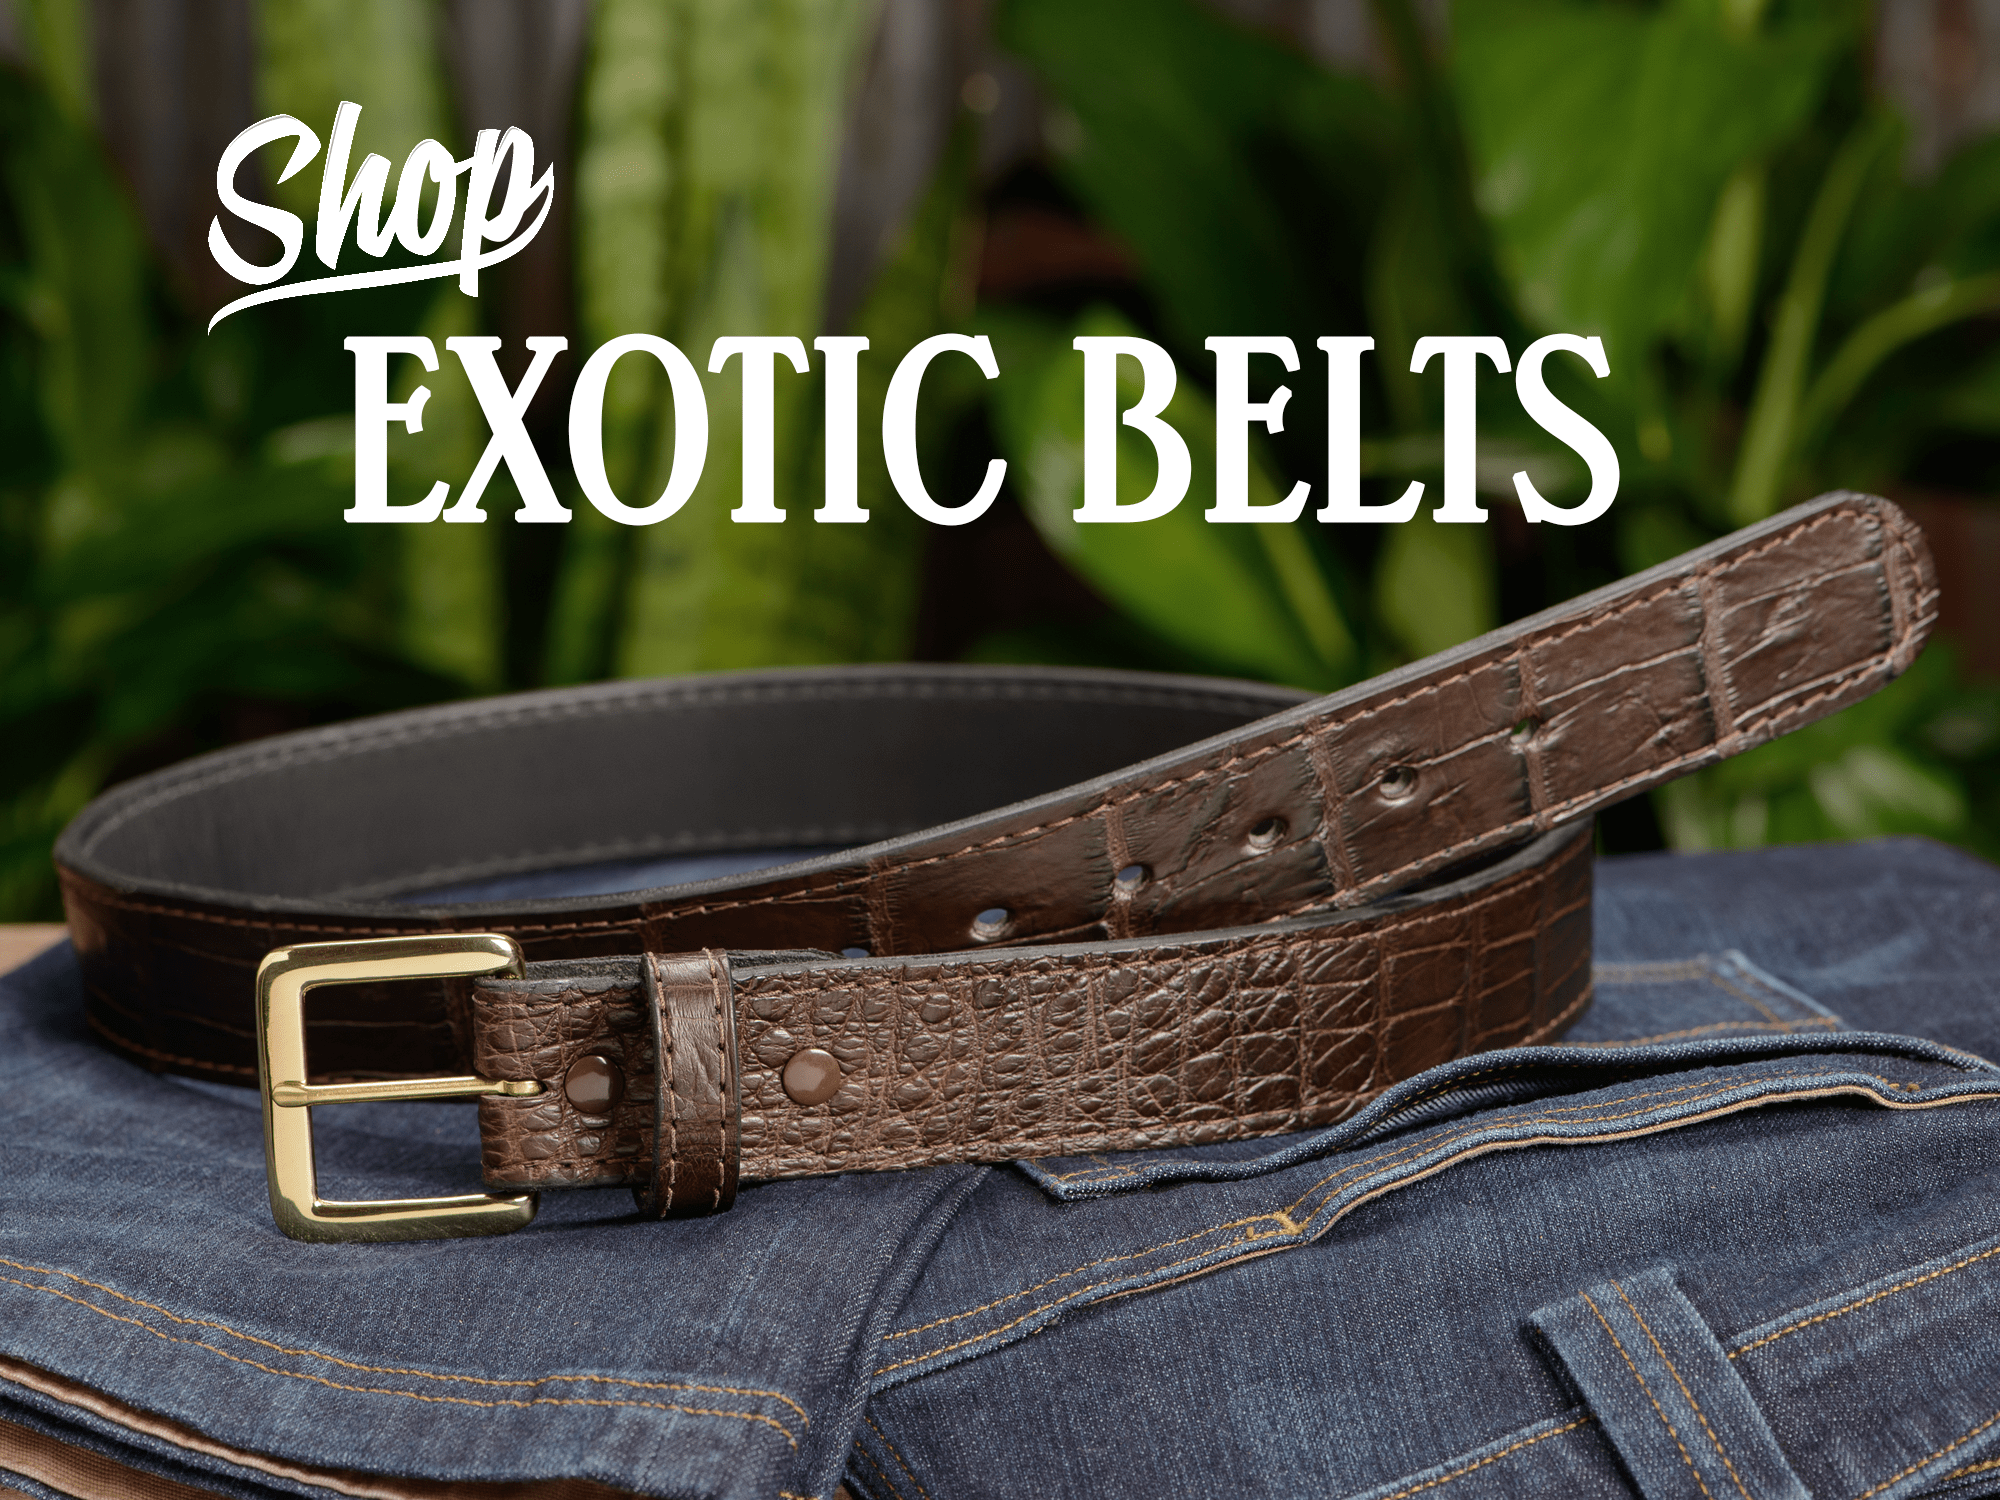 High Quality Handcrafted USA Made Work Belts